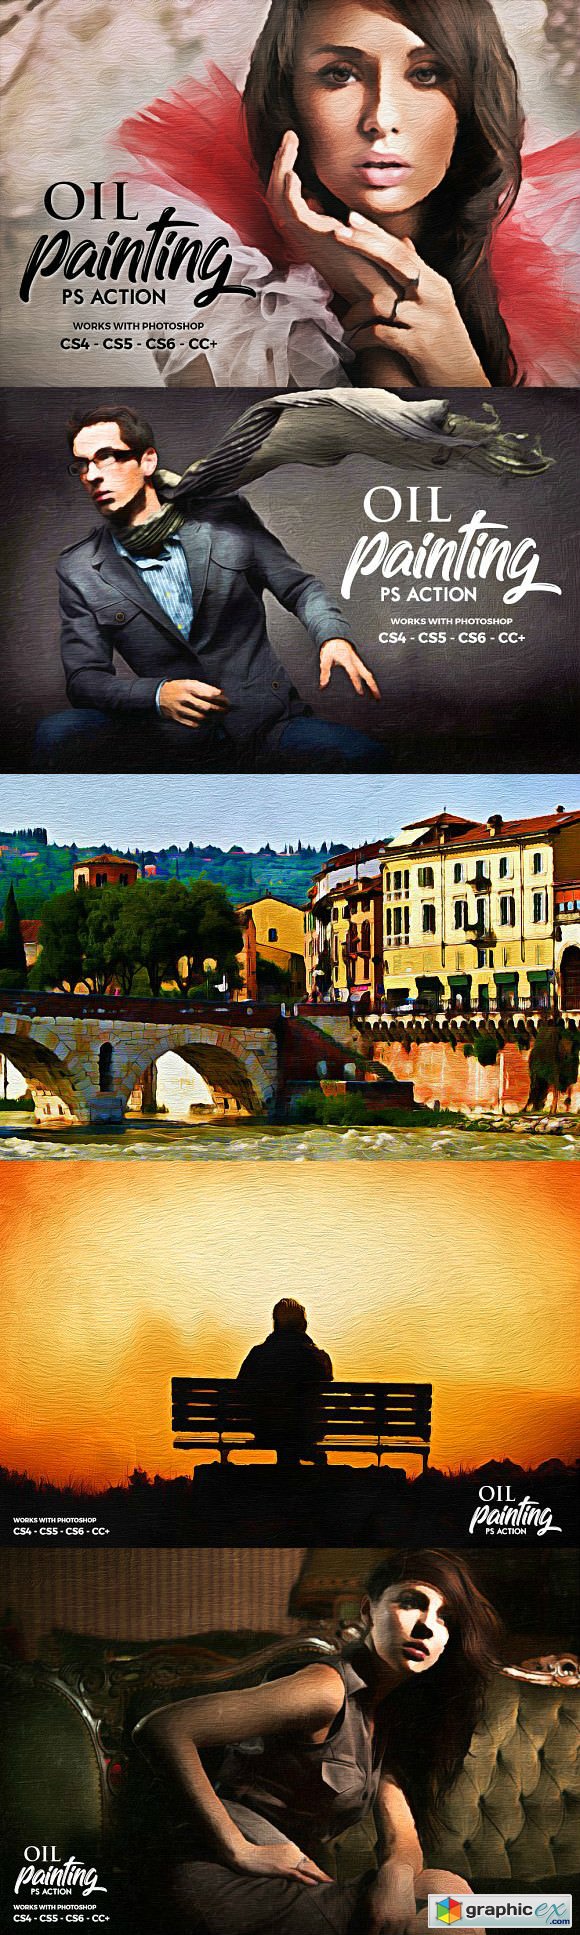 Oil Painting Photoshop Action 2314630